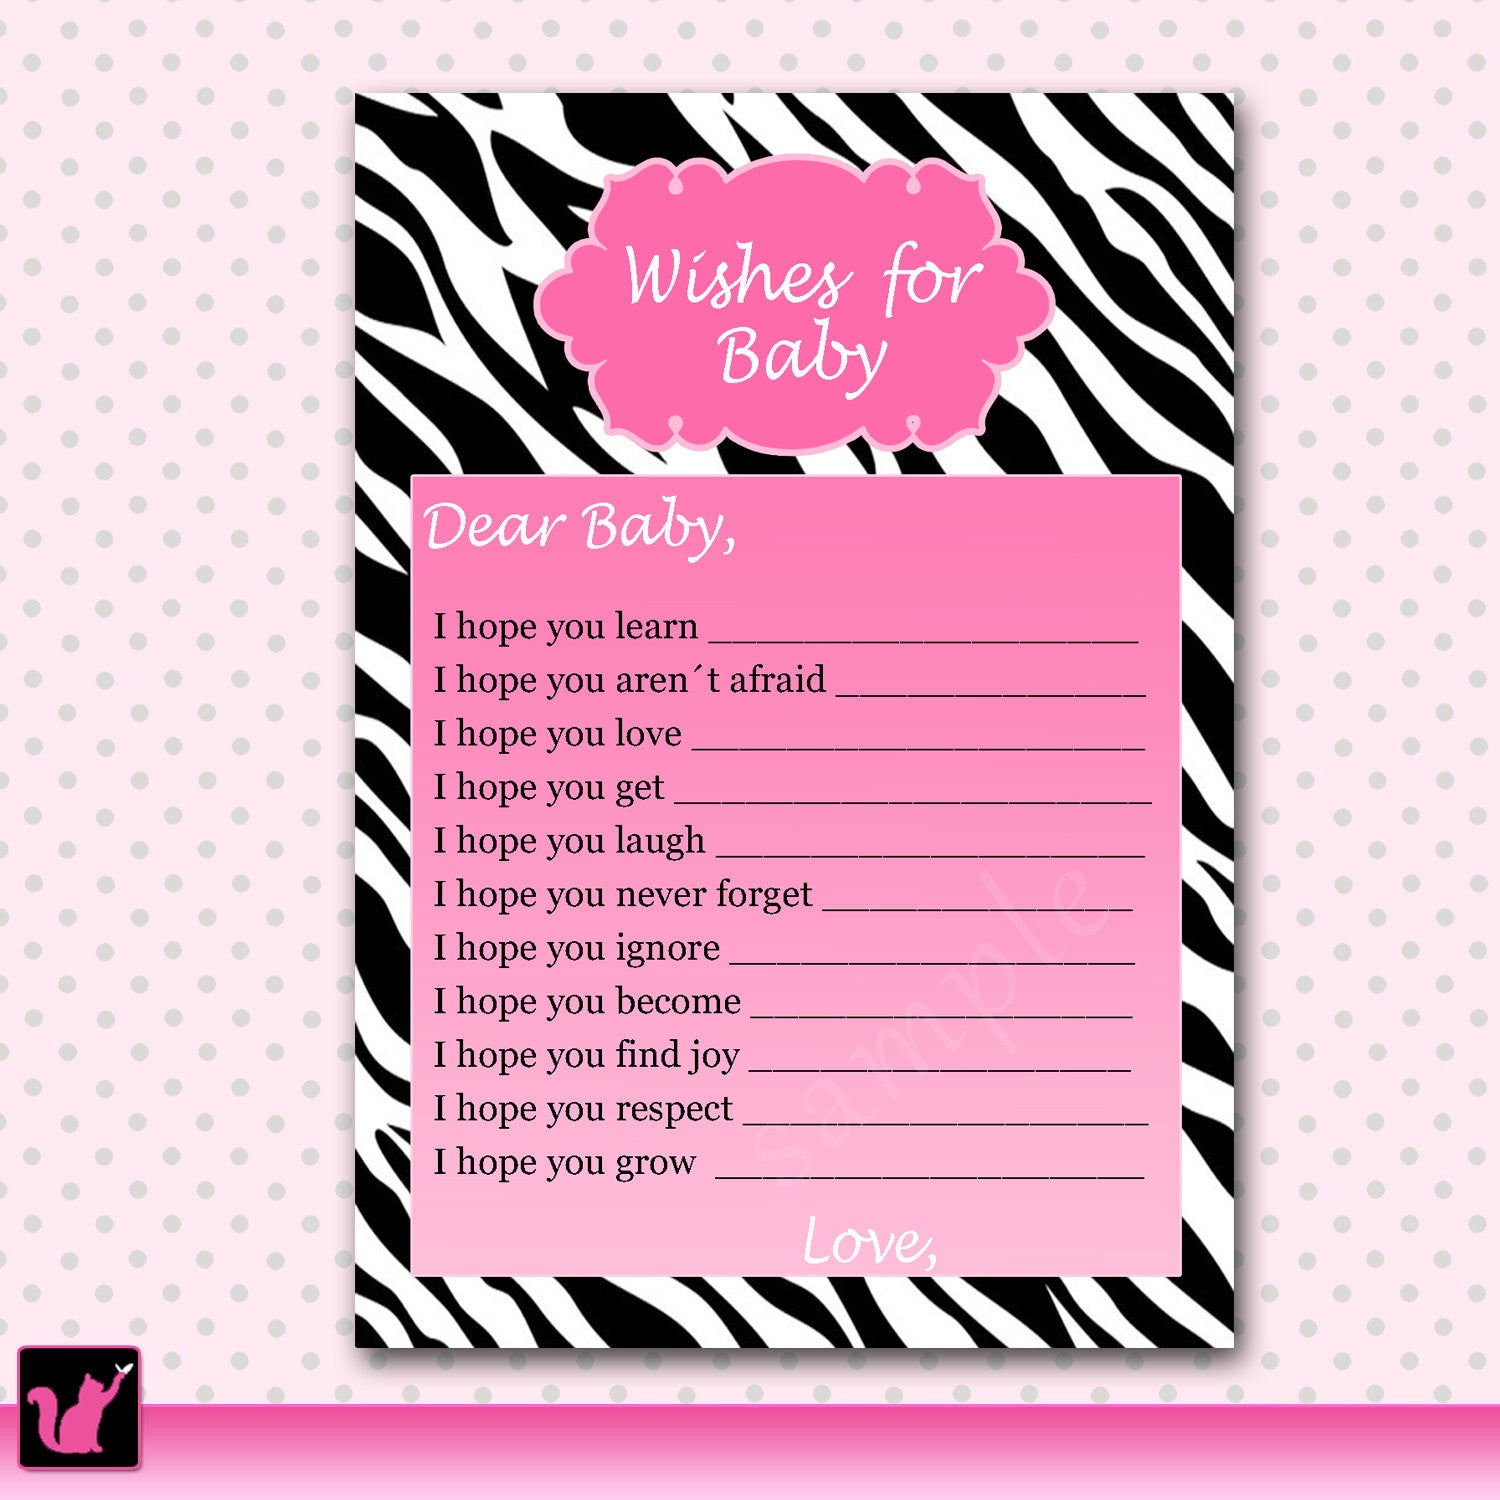 Wishes for Baby Card Zebra Hot Pink